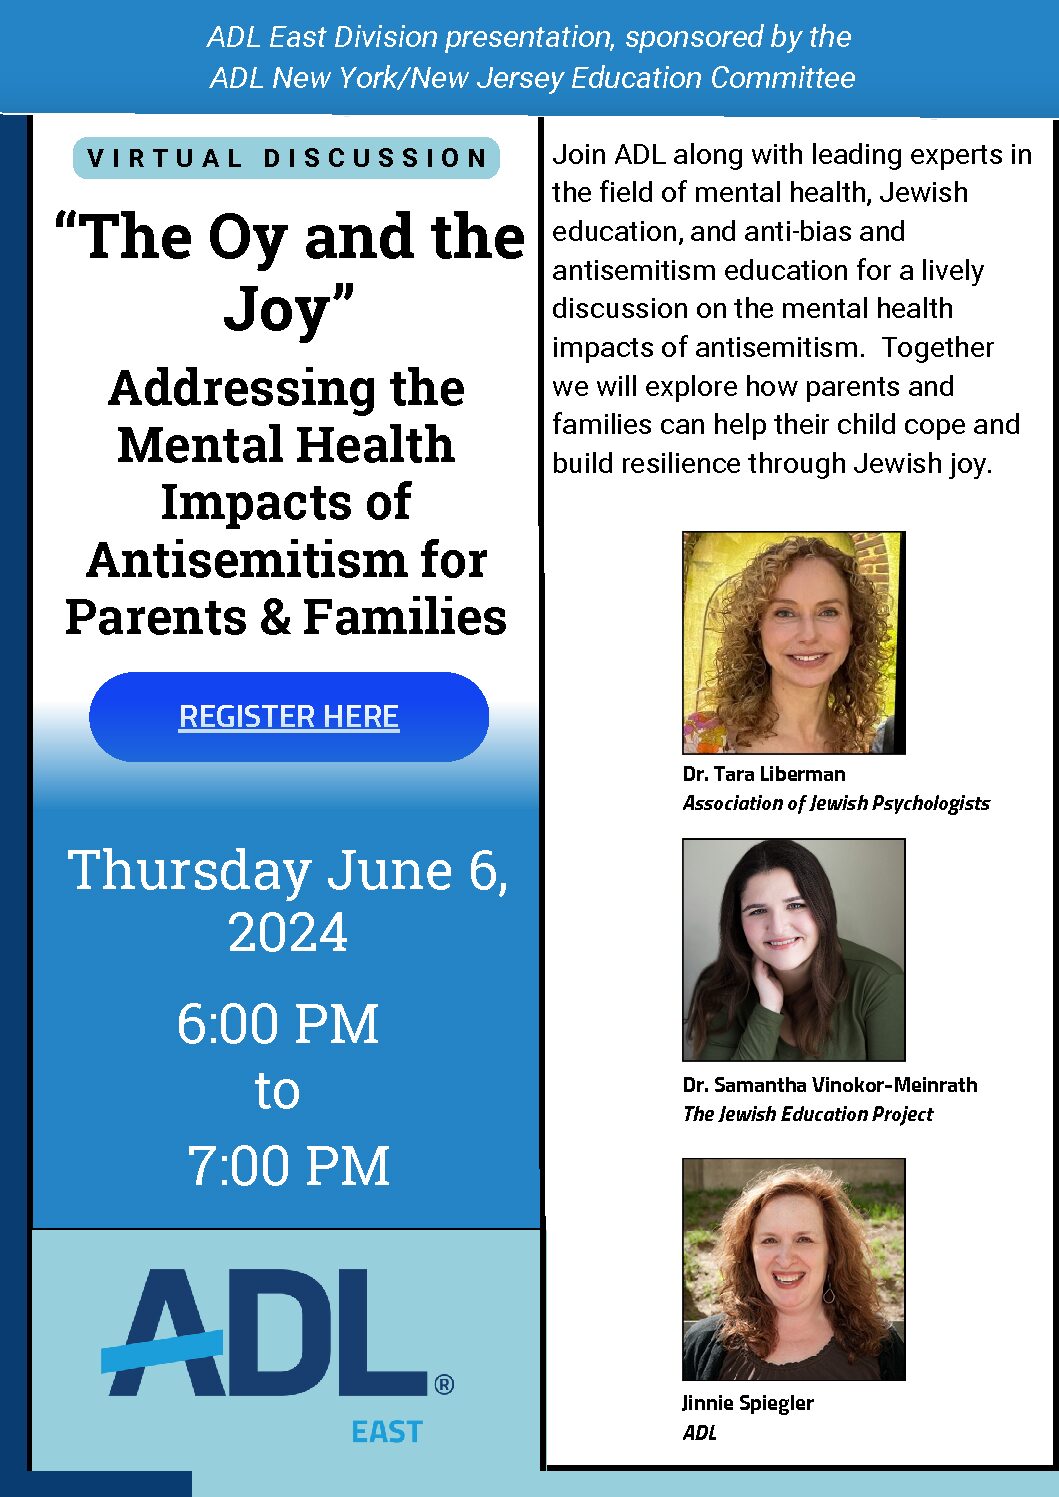 ADL - "The Oy and the Joy" Addressing the Mental Health Impacts of Antisemitism for Parents & Families